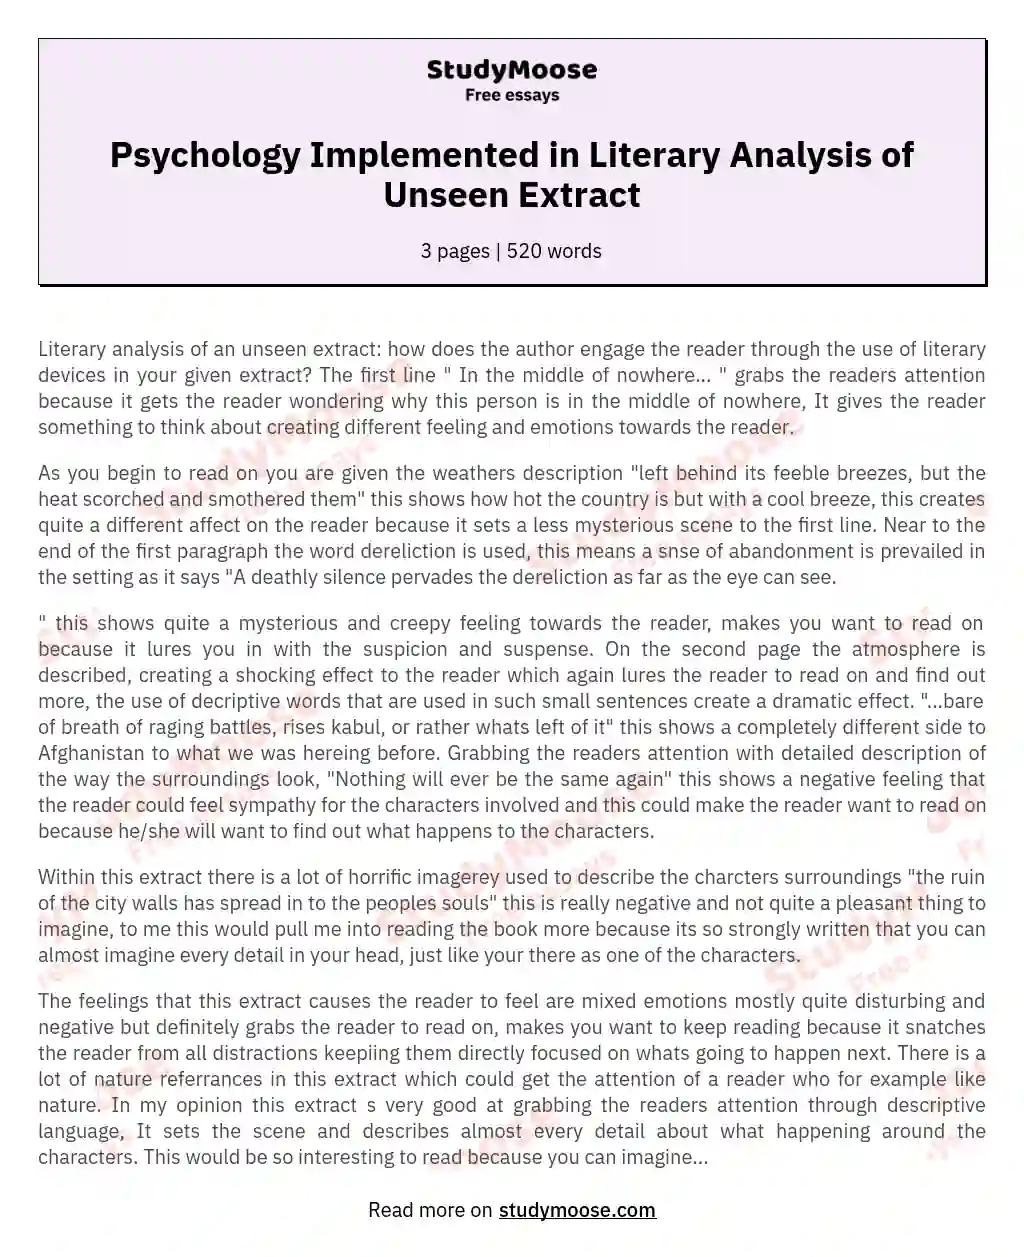 Psychology Implemented in Literary Analysis of Unseen Extract